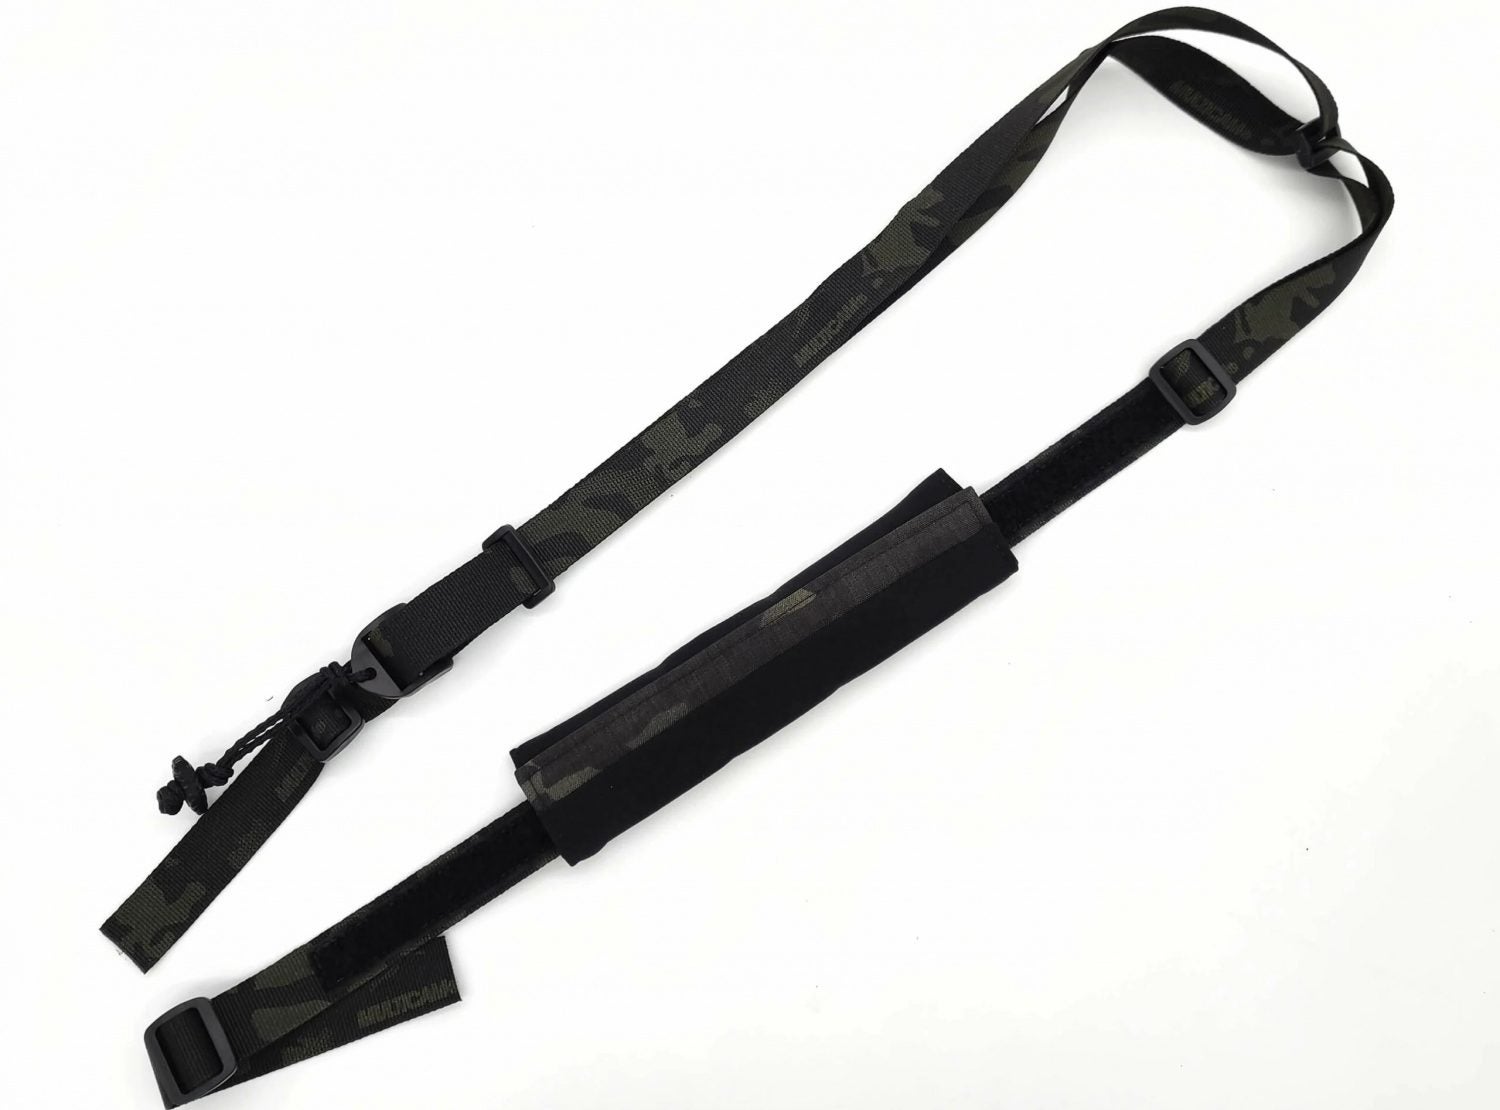 The Link is a brainchild rifle sling between ANR Design LLC and Cole-Tac. The Link Sling is a 1″ webbing design rifle sling, stitched with Mil-Spec bonded Nylon thread. Mounted on the rifle, the forward section of the Link rifle sling has a 40″ length of pull, fully extended. The rear adjustment of the Link rifle sling has a 30″ total length of pull. Depending on the operator’s size, the length of pull easily allows plenty of slack to transfer the weapon system to the opposite shoulder of even the largest of end-users. The Link rifle sling is Berry Compliant and constructed of 100% US materials, assembled in New Hampshire and South Dakota at Cole-Tac facilities.